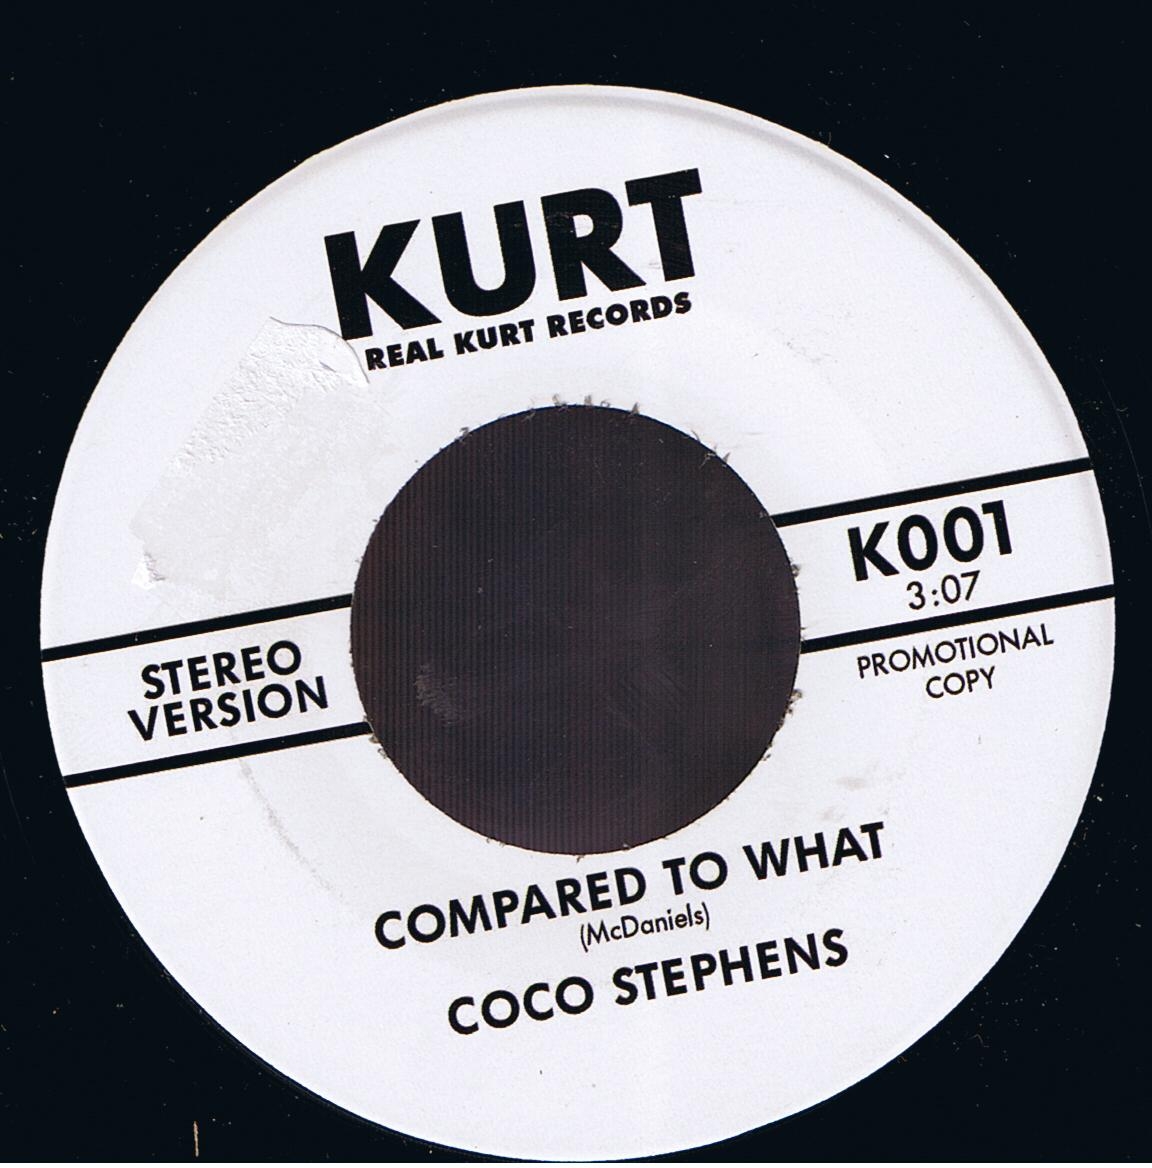 Coco Stephens - Compared To What(Stereo Version) / Coco Stephens - Compared To What(Mono Version) (7")